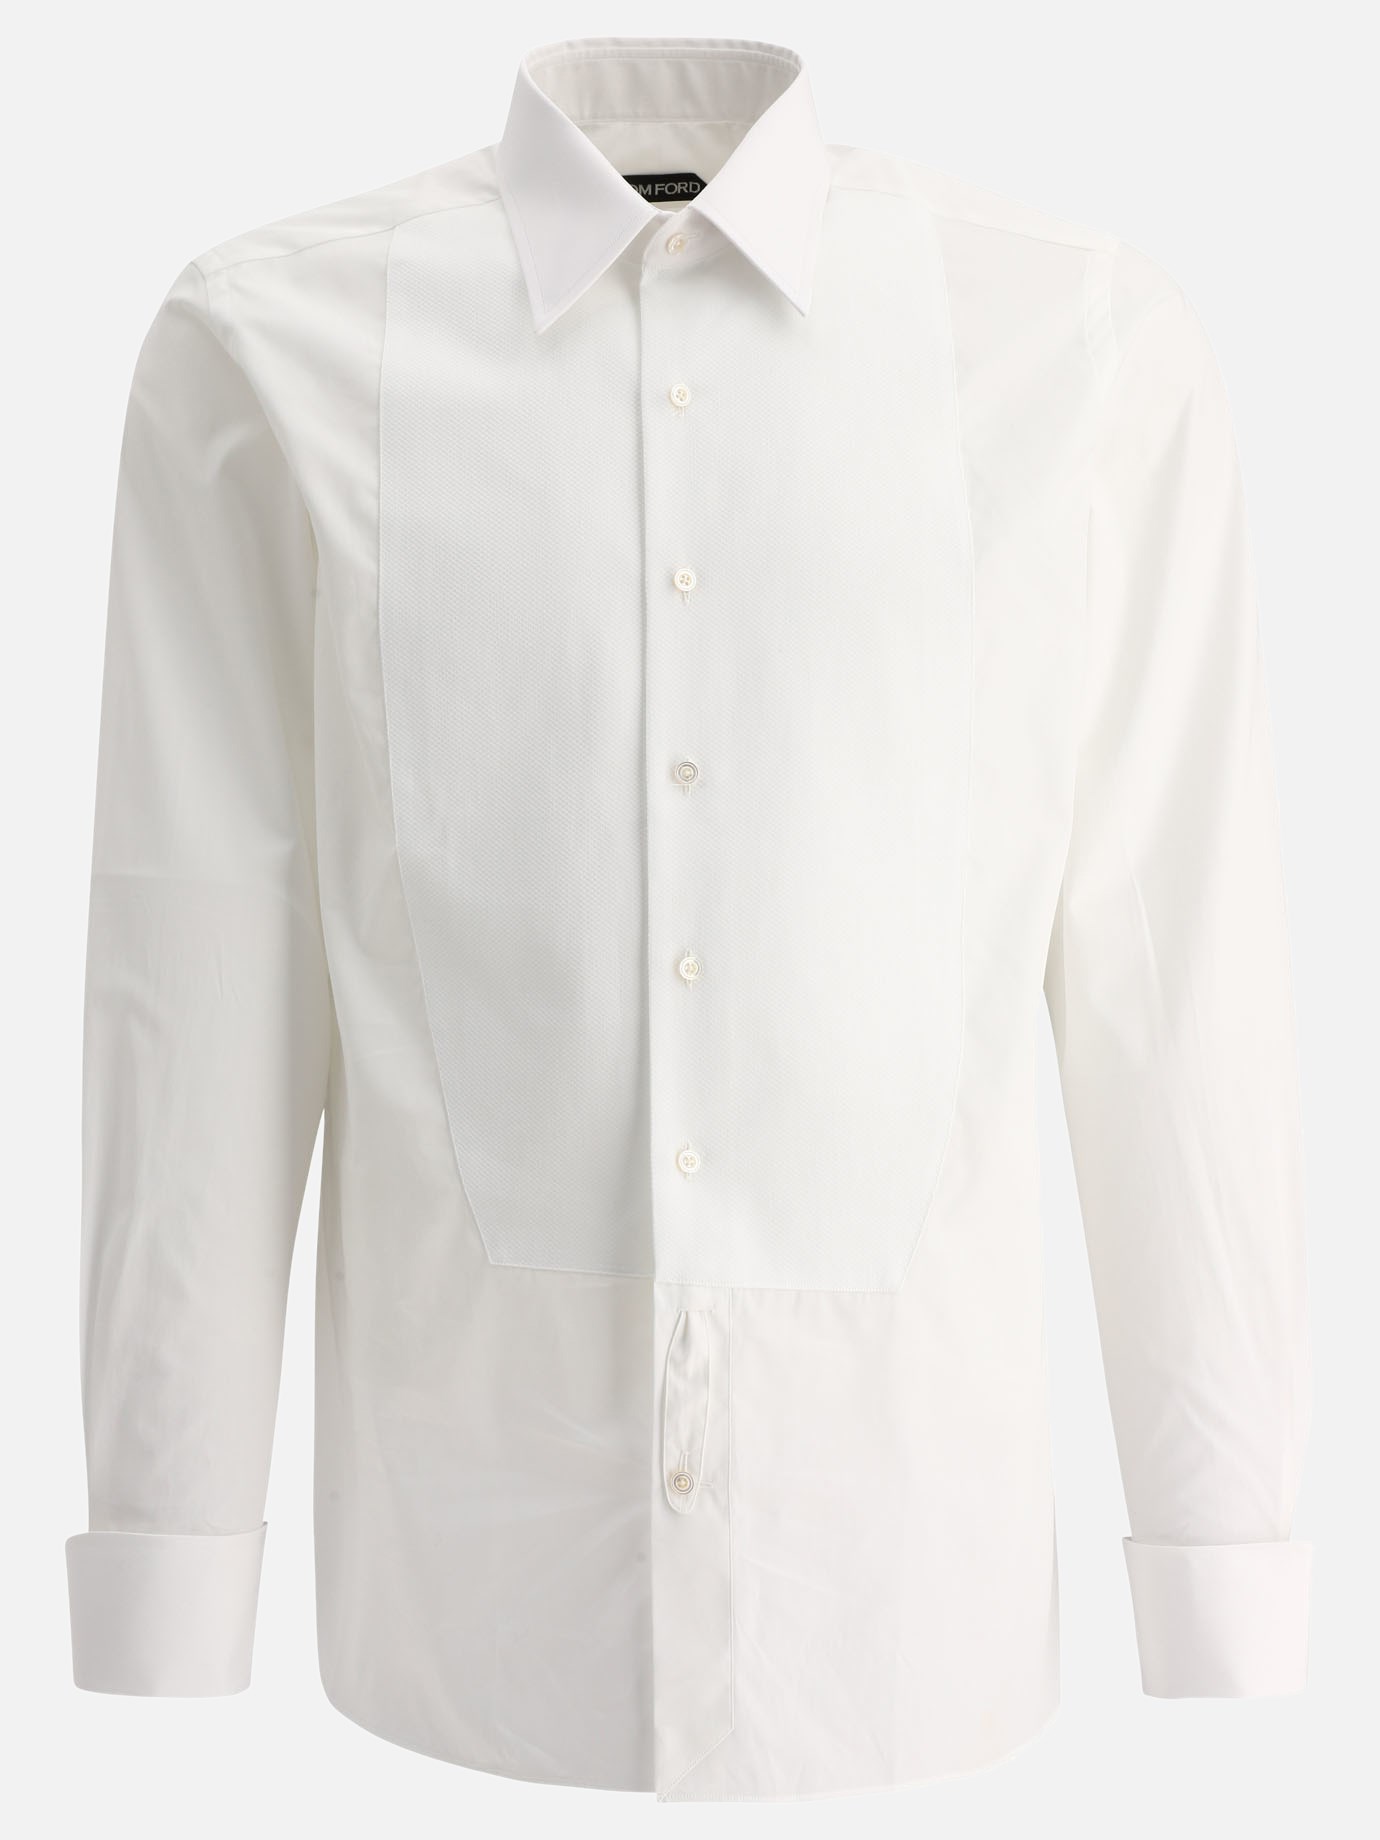 Camicia  French Cuff by Tom Ford - 3